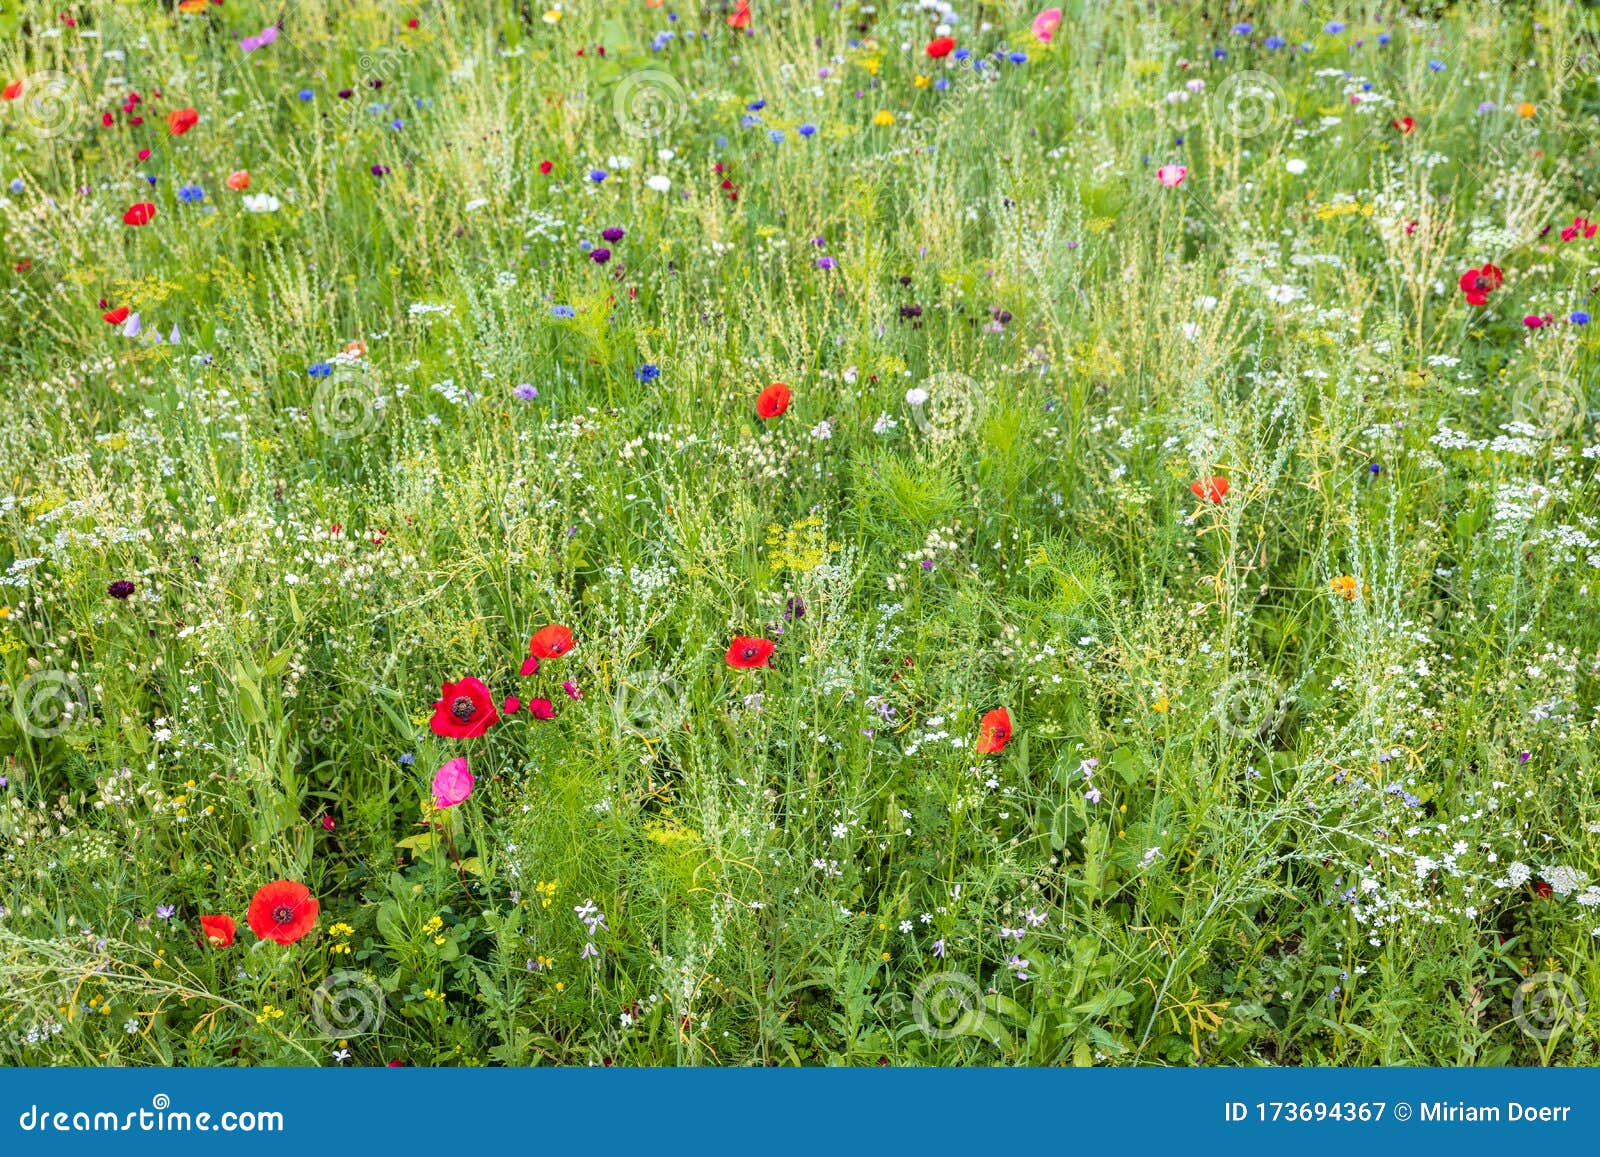 wild and unspoiled flower meadow, natural conservation for insects